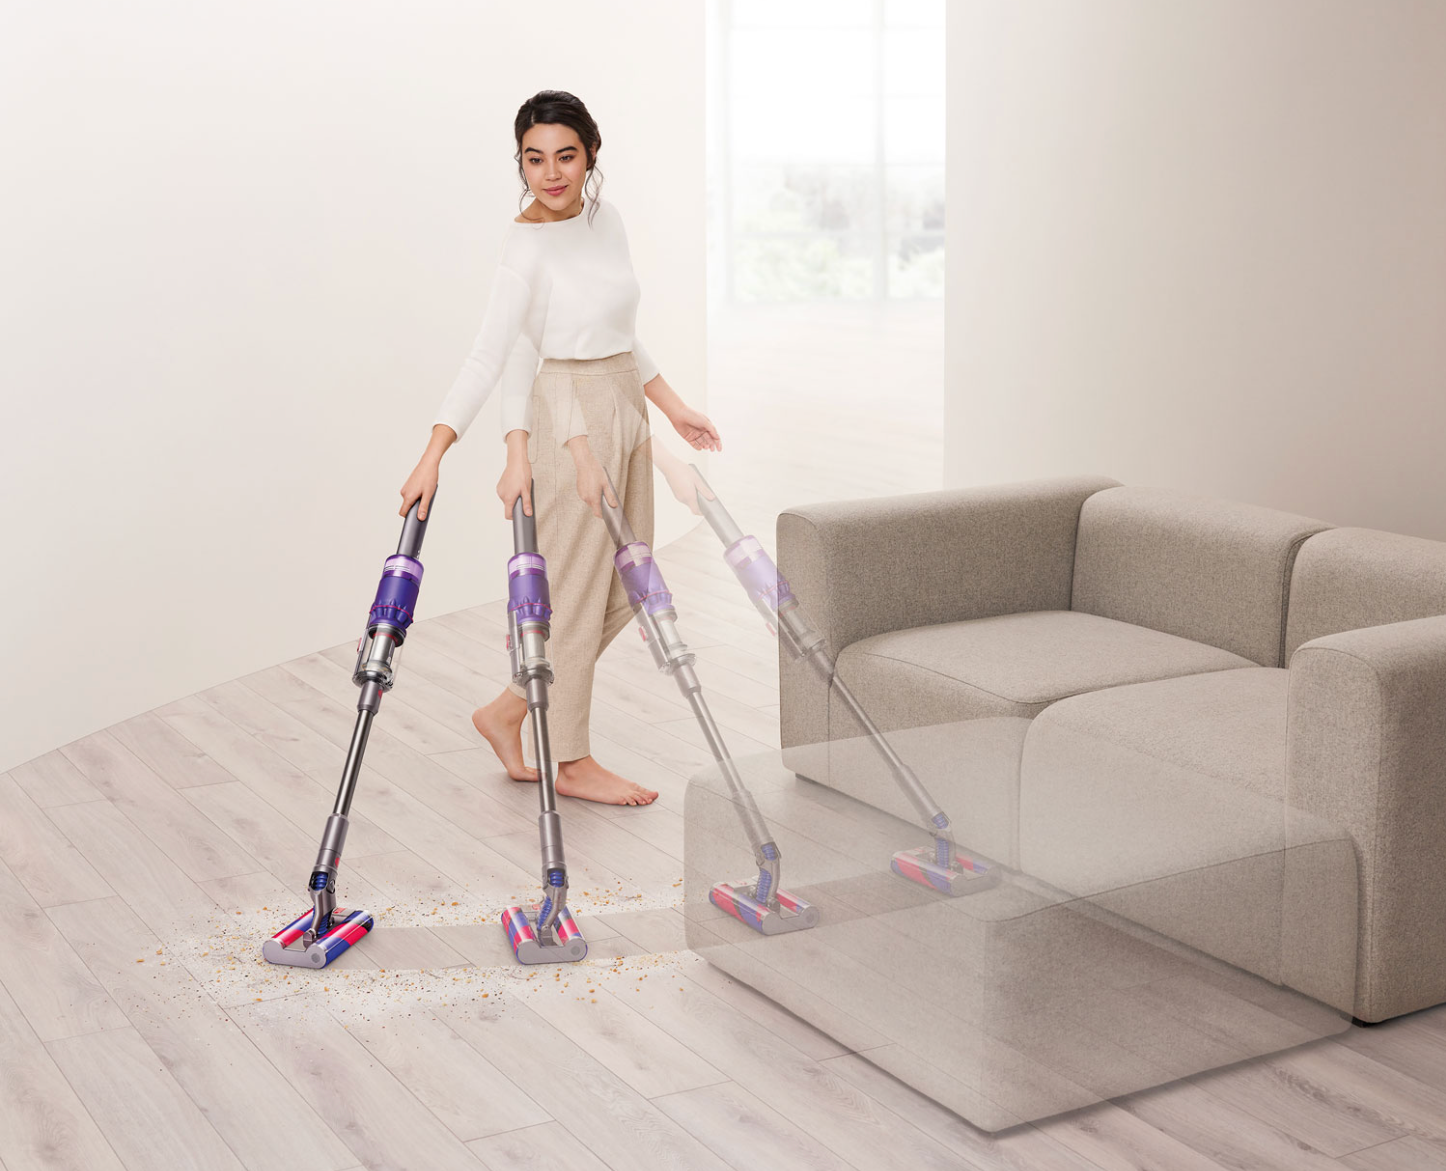 Woman vacuuming with a Dyson cordless vacuum.